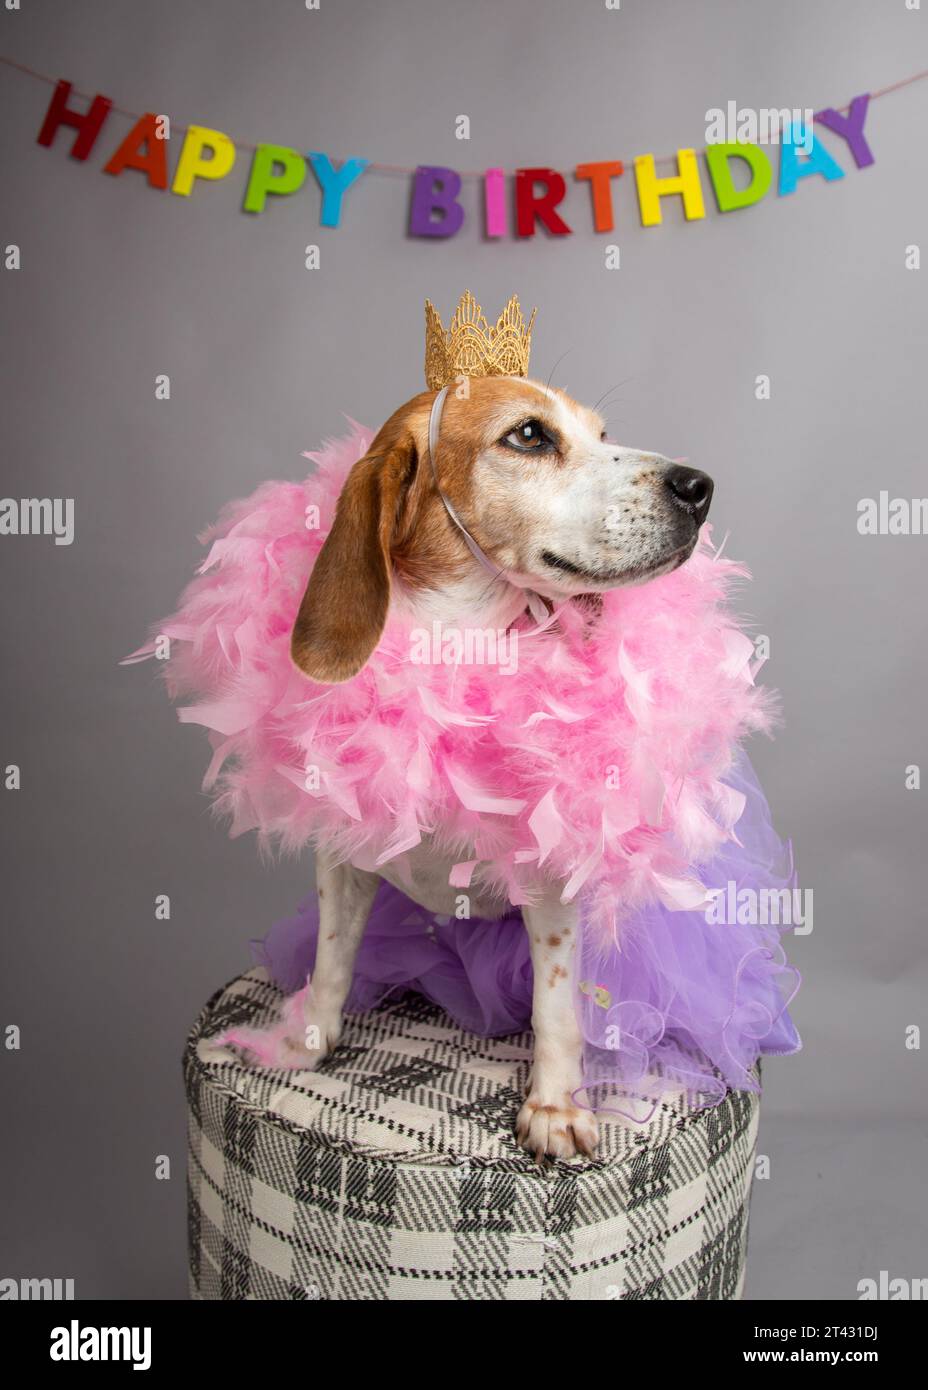 Portrait of a beagle dog wearing a crown, tutu and feather boa sitting on a stool Stock Photo